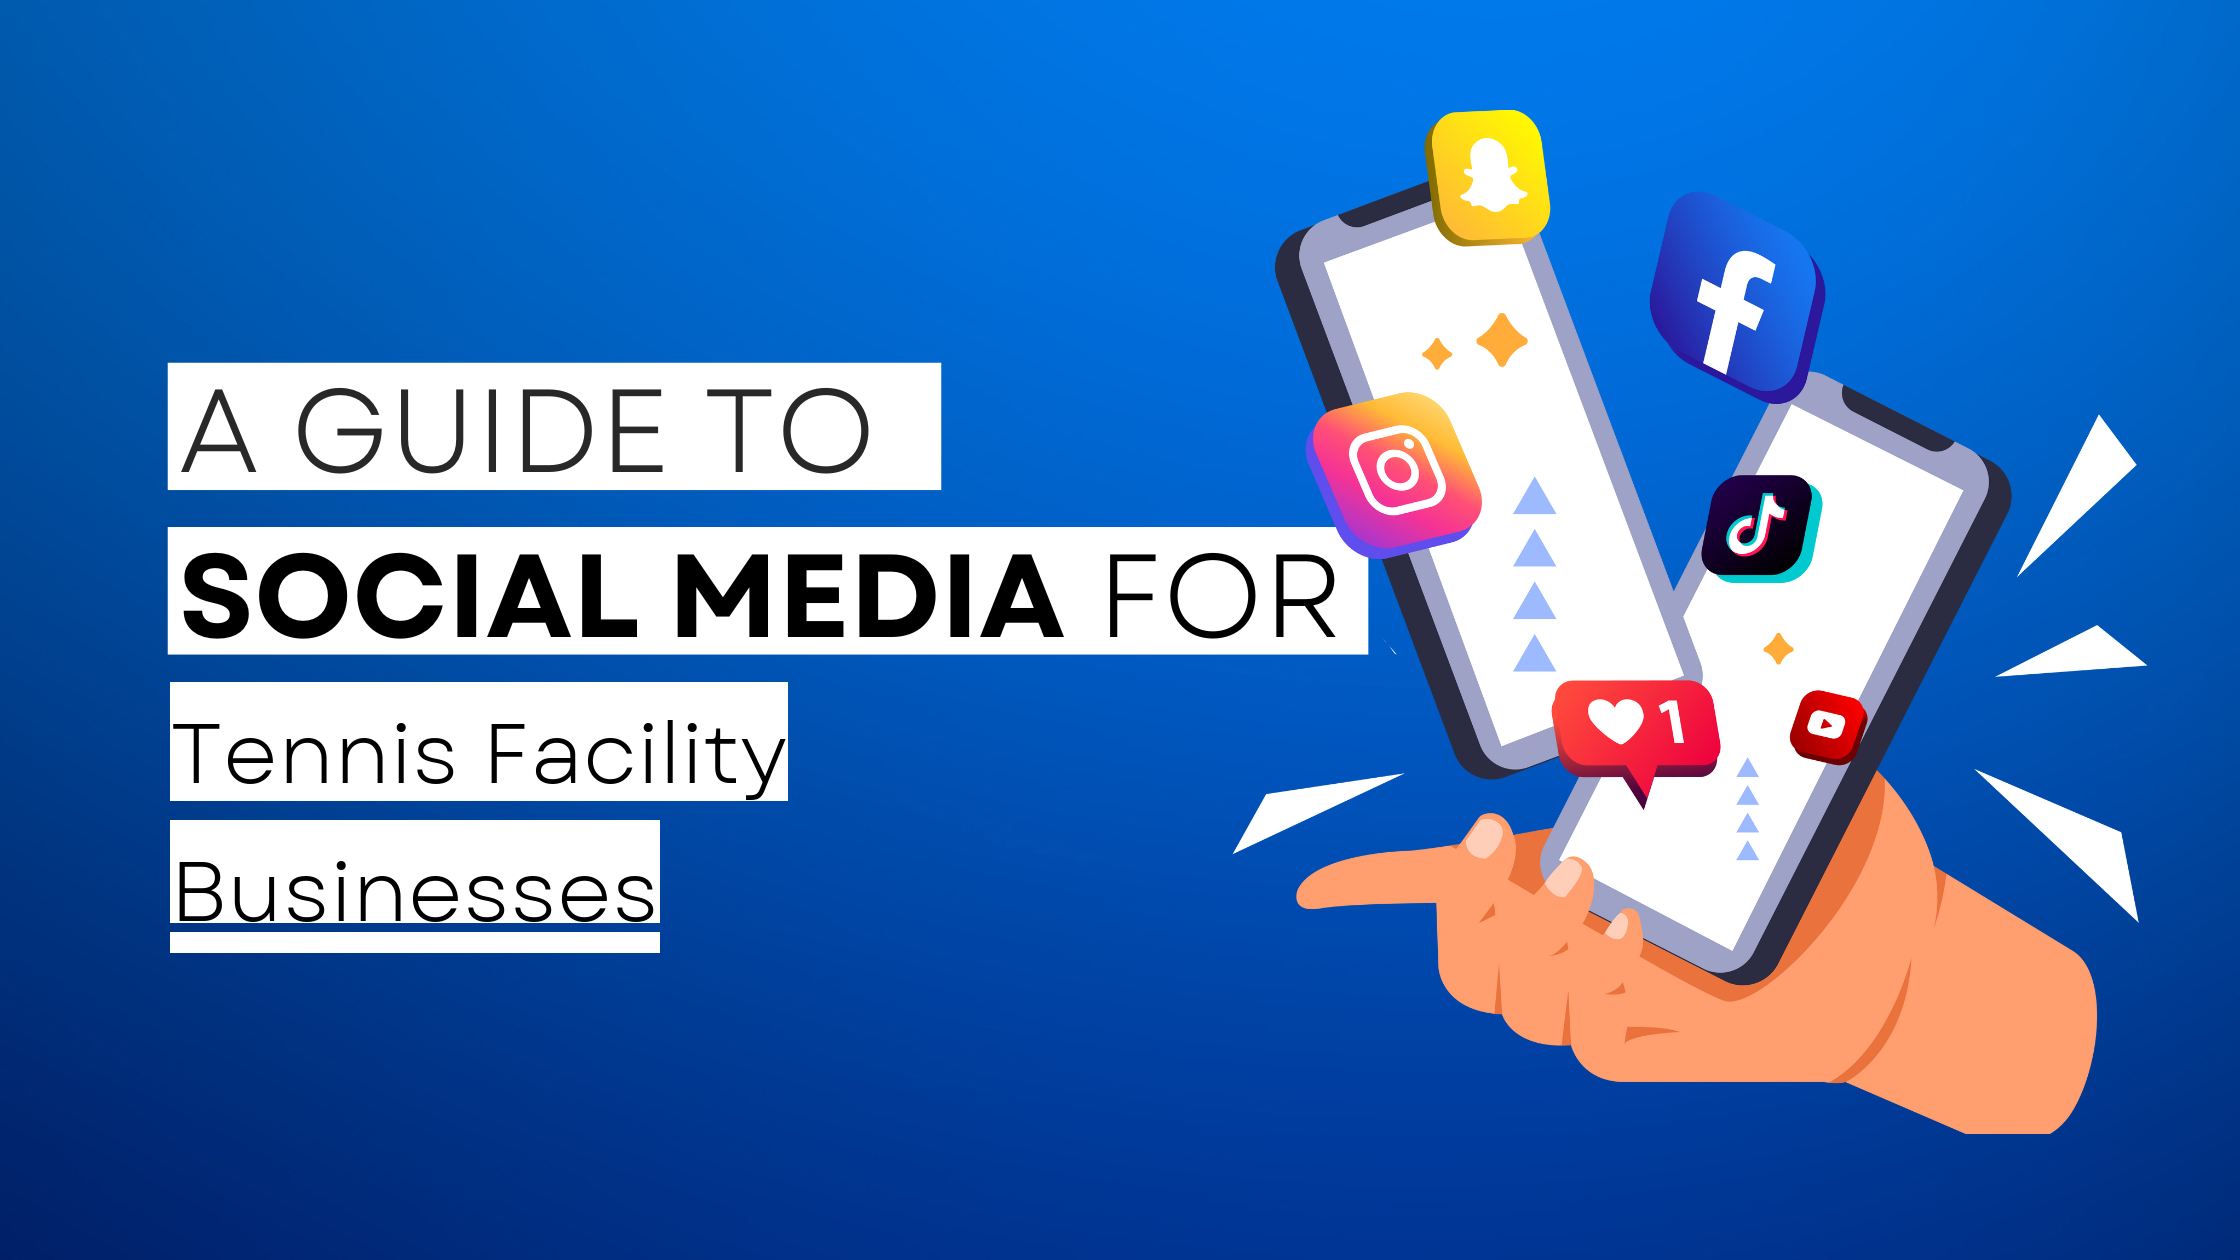 How to start Tennis Facility on social media